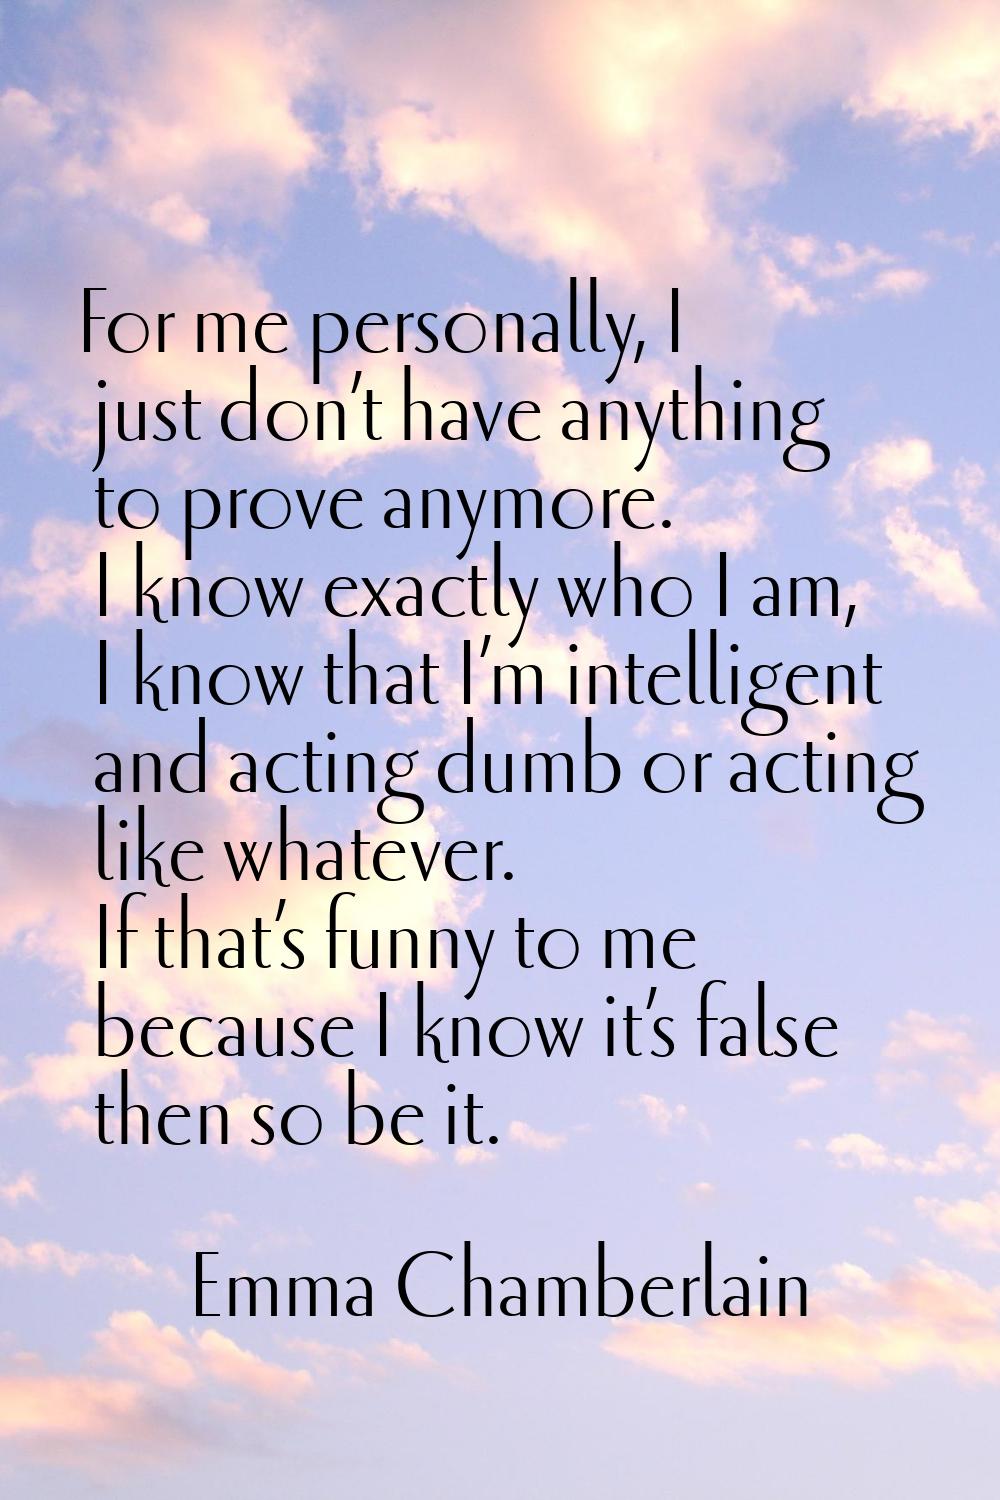 For me personally, I just don’t have anything to prove anymore. I know exactly who I am, I know tha